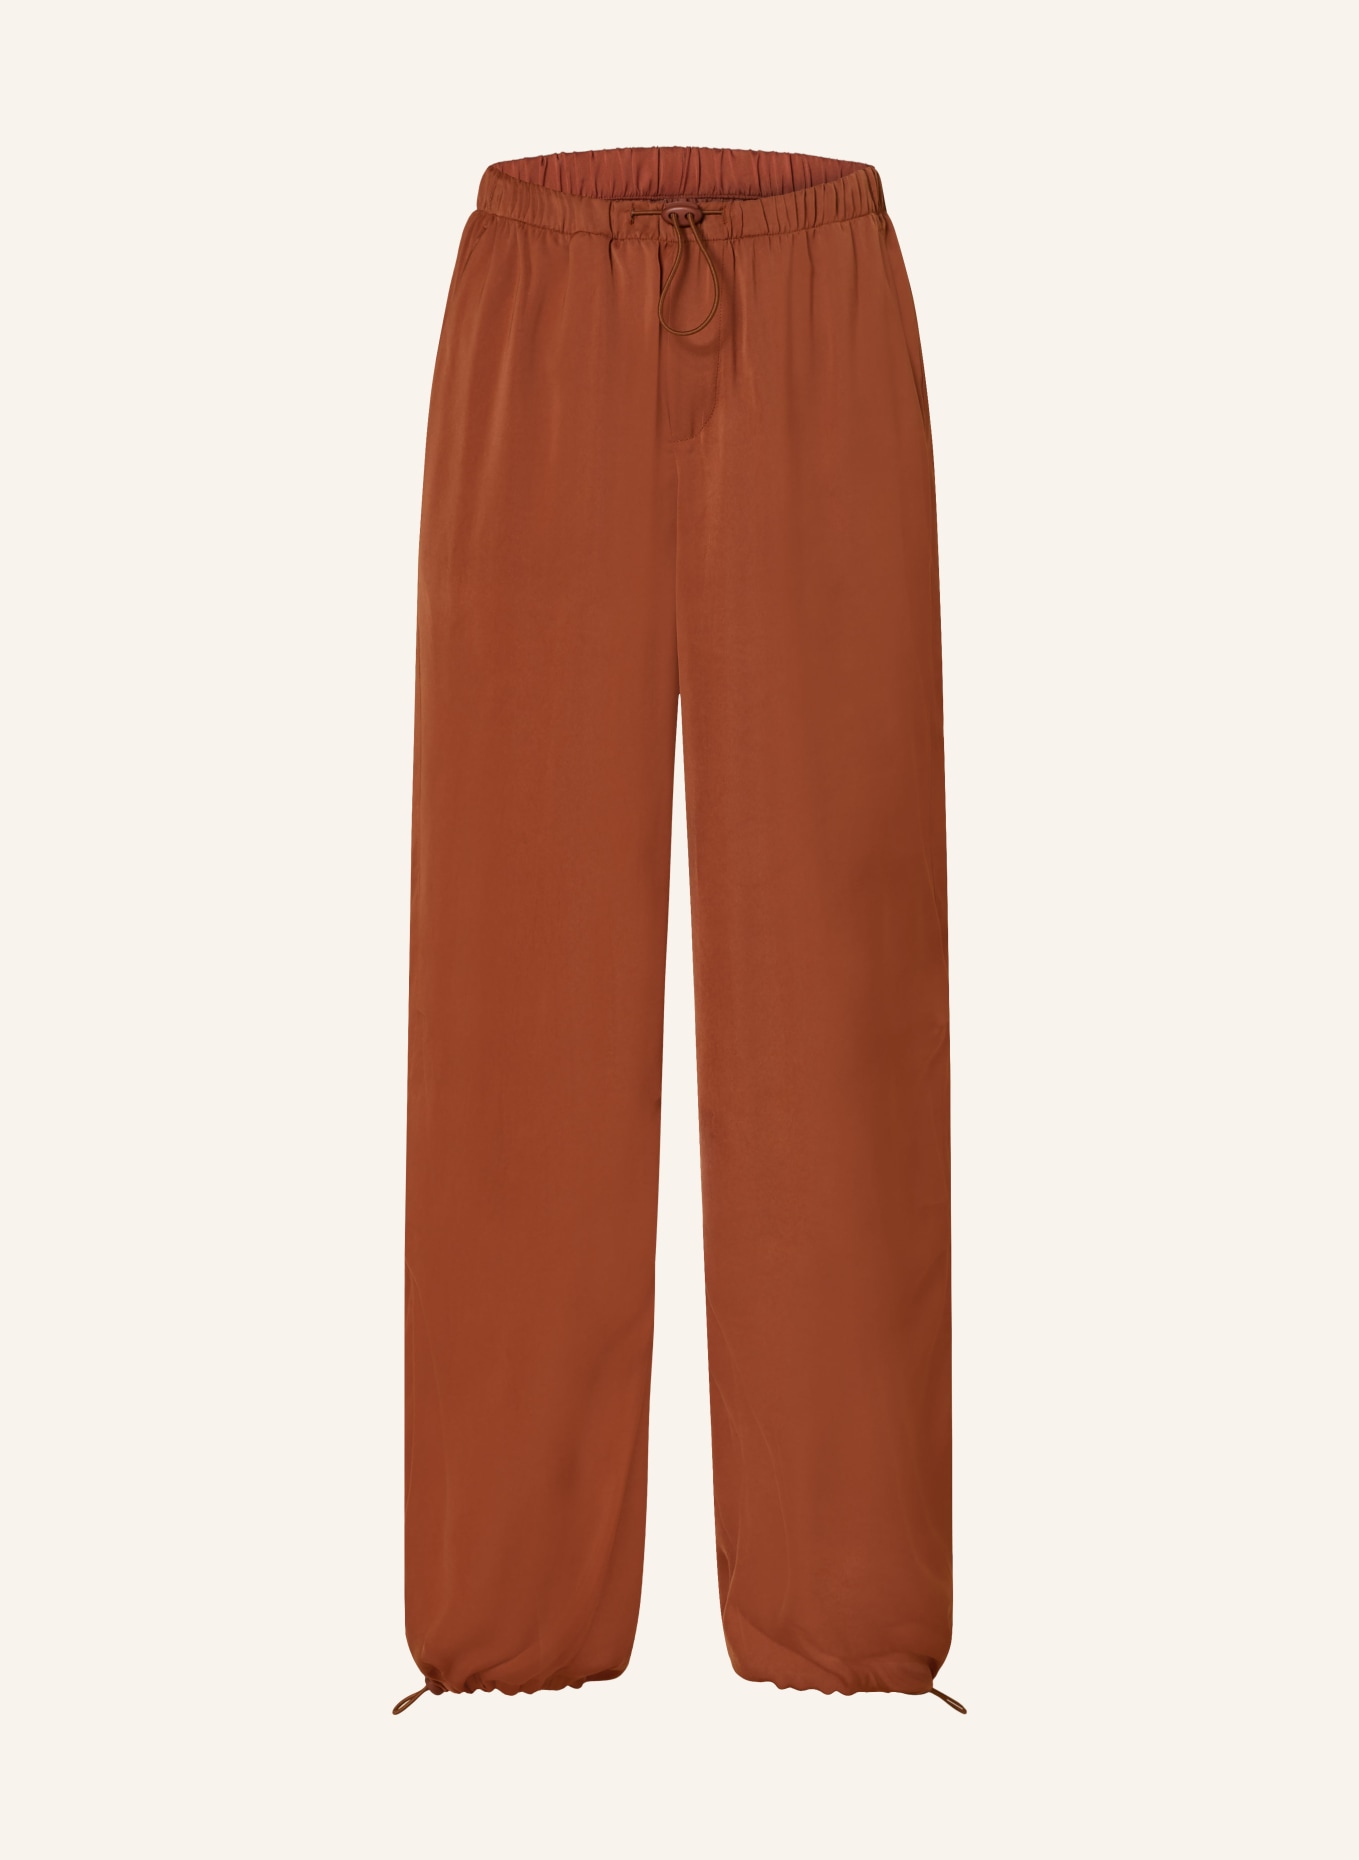 10DAYS Satin pants in jogger style, Color: BROWN (Image 1)